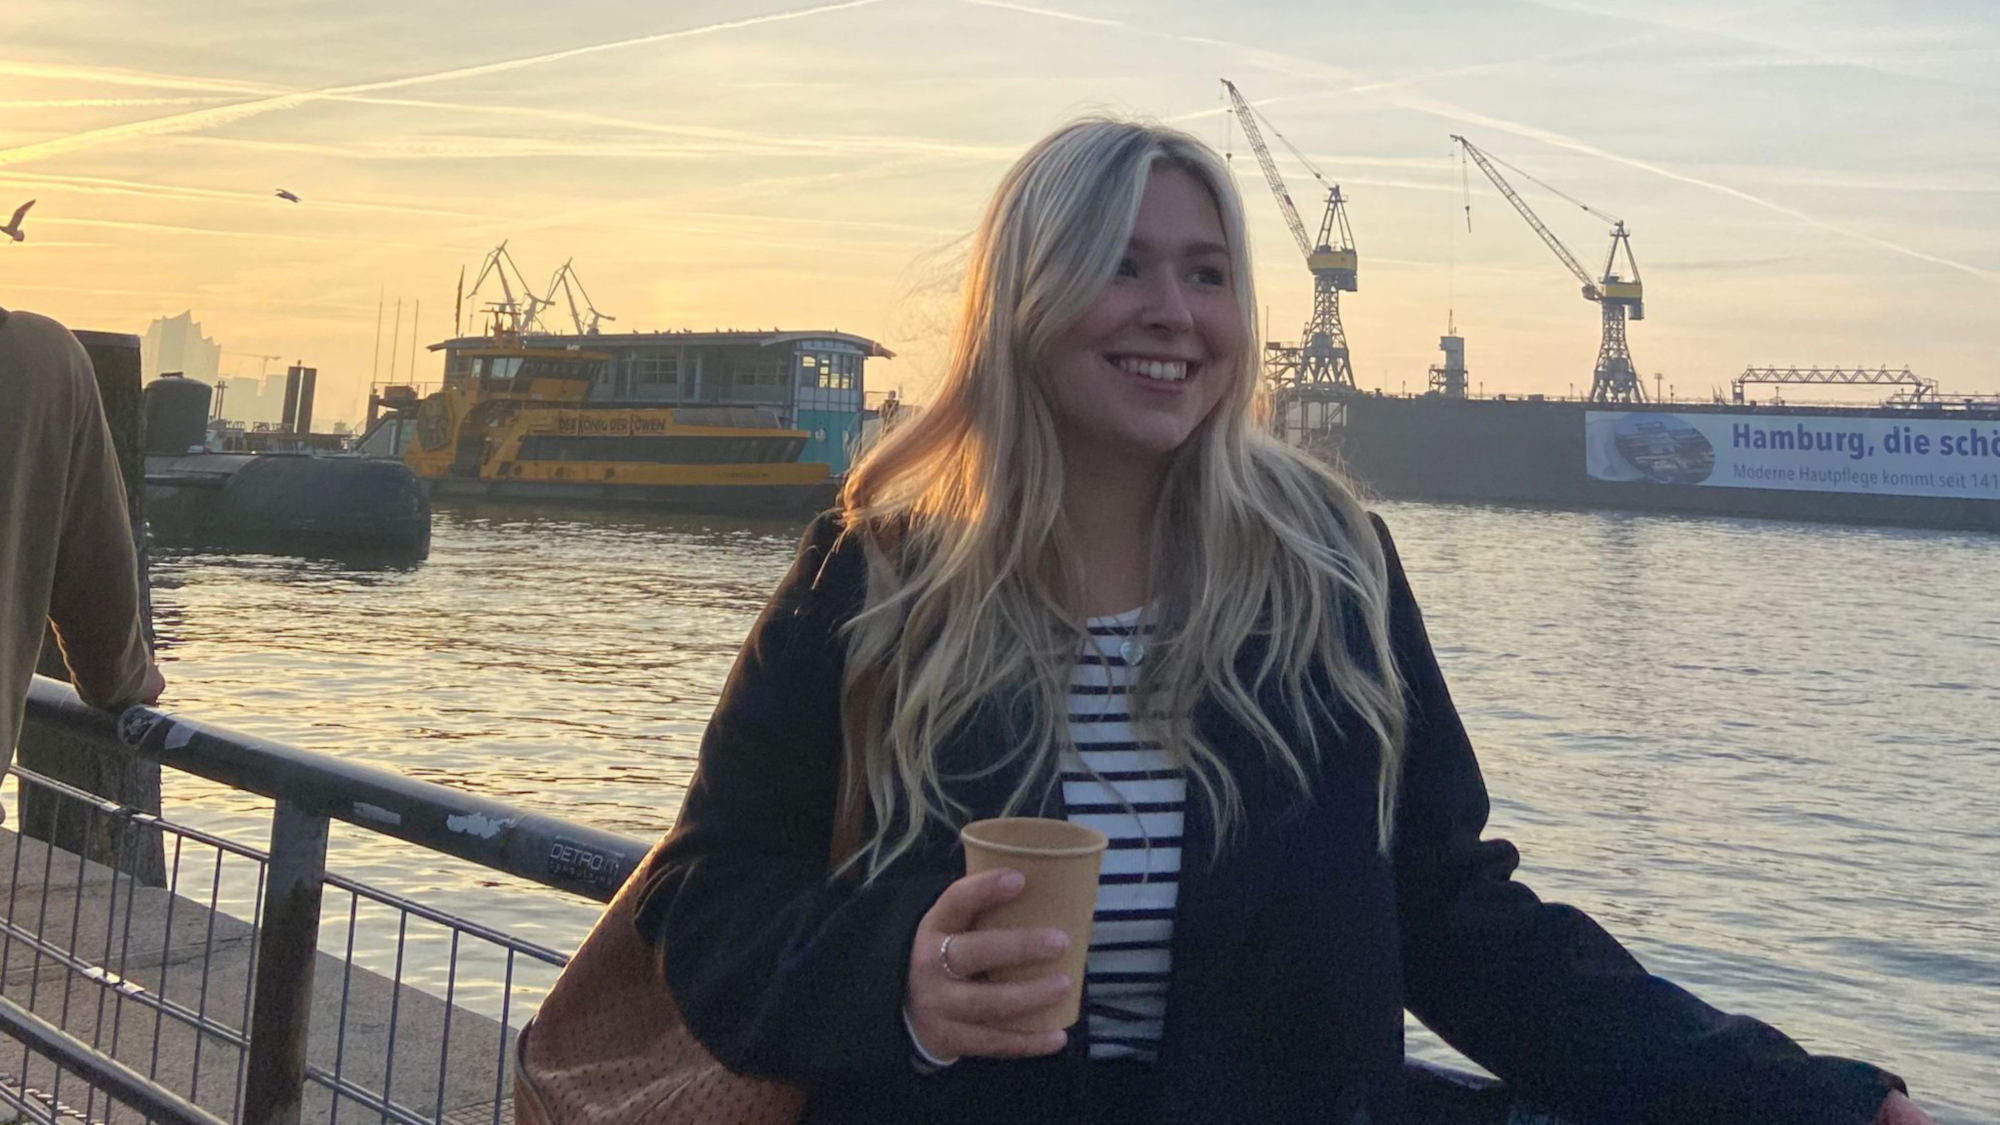 Emily is standing in front of the Elbe in Hamburg. She is holding a coffee cup in her hand.